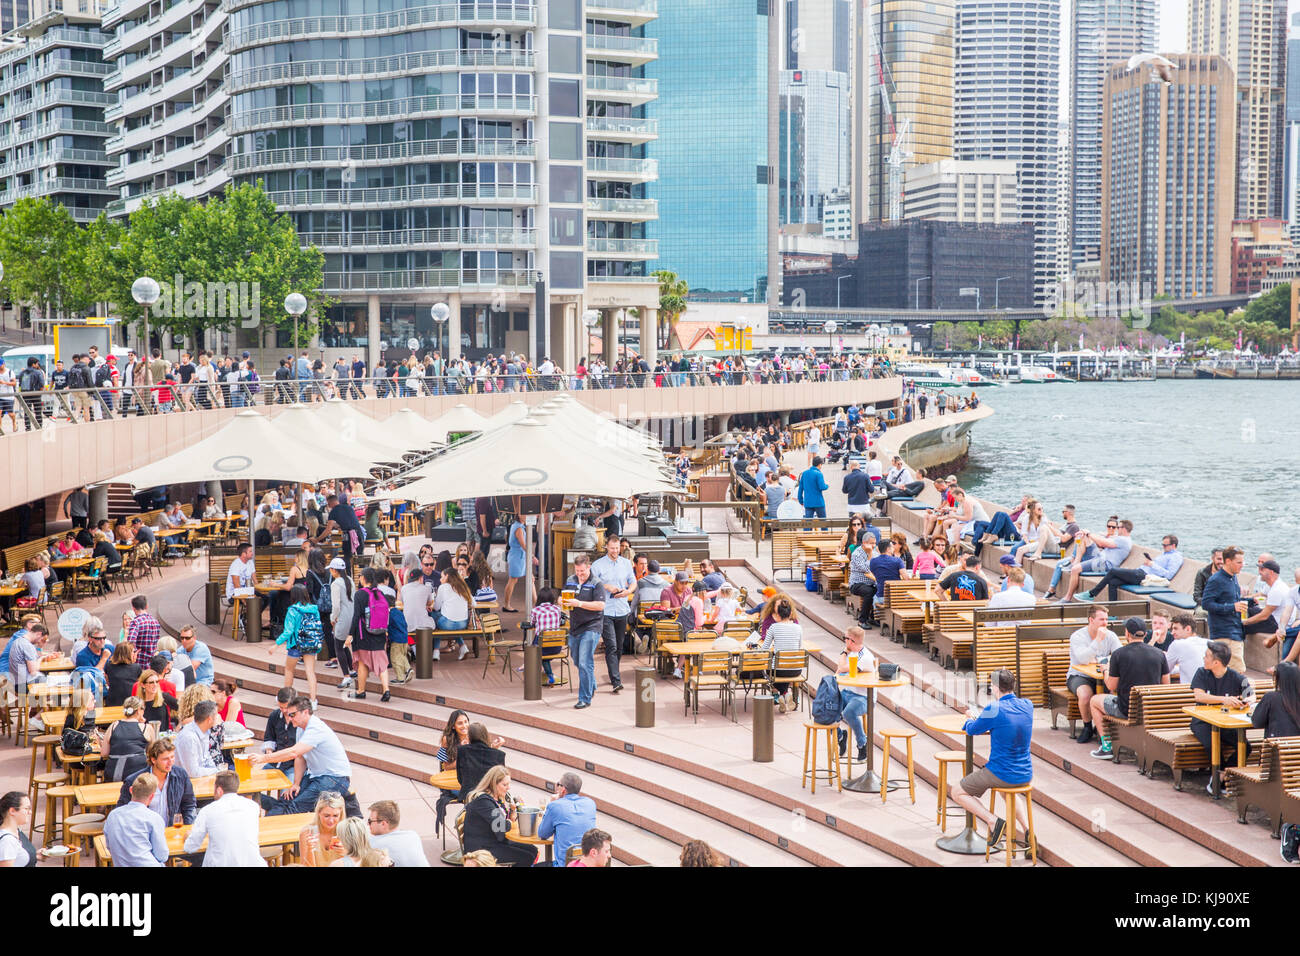 People enjoying food and drink at the Opera Bar at circular quay in Sydney,Australia Stock Photo